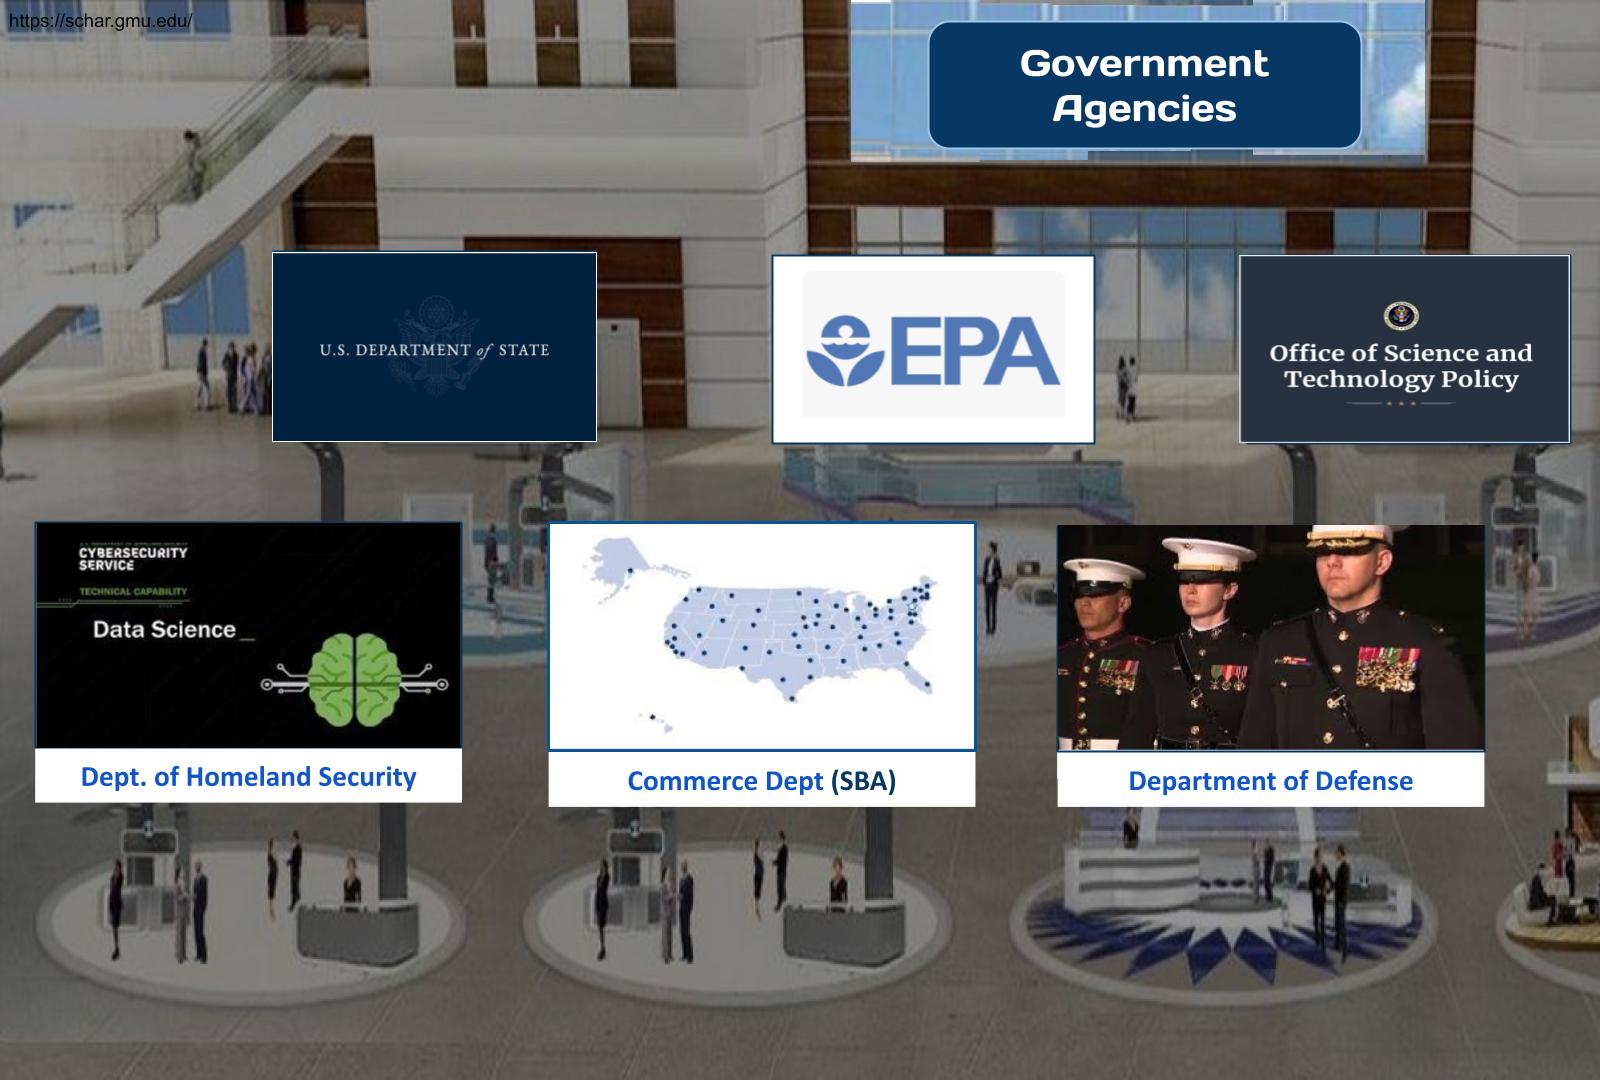 Government Agencies